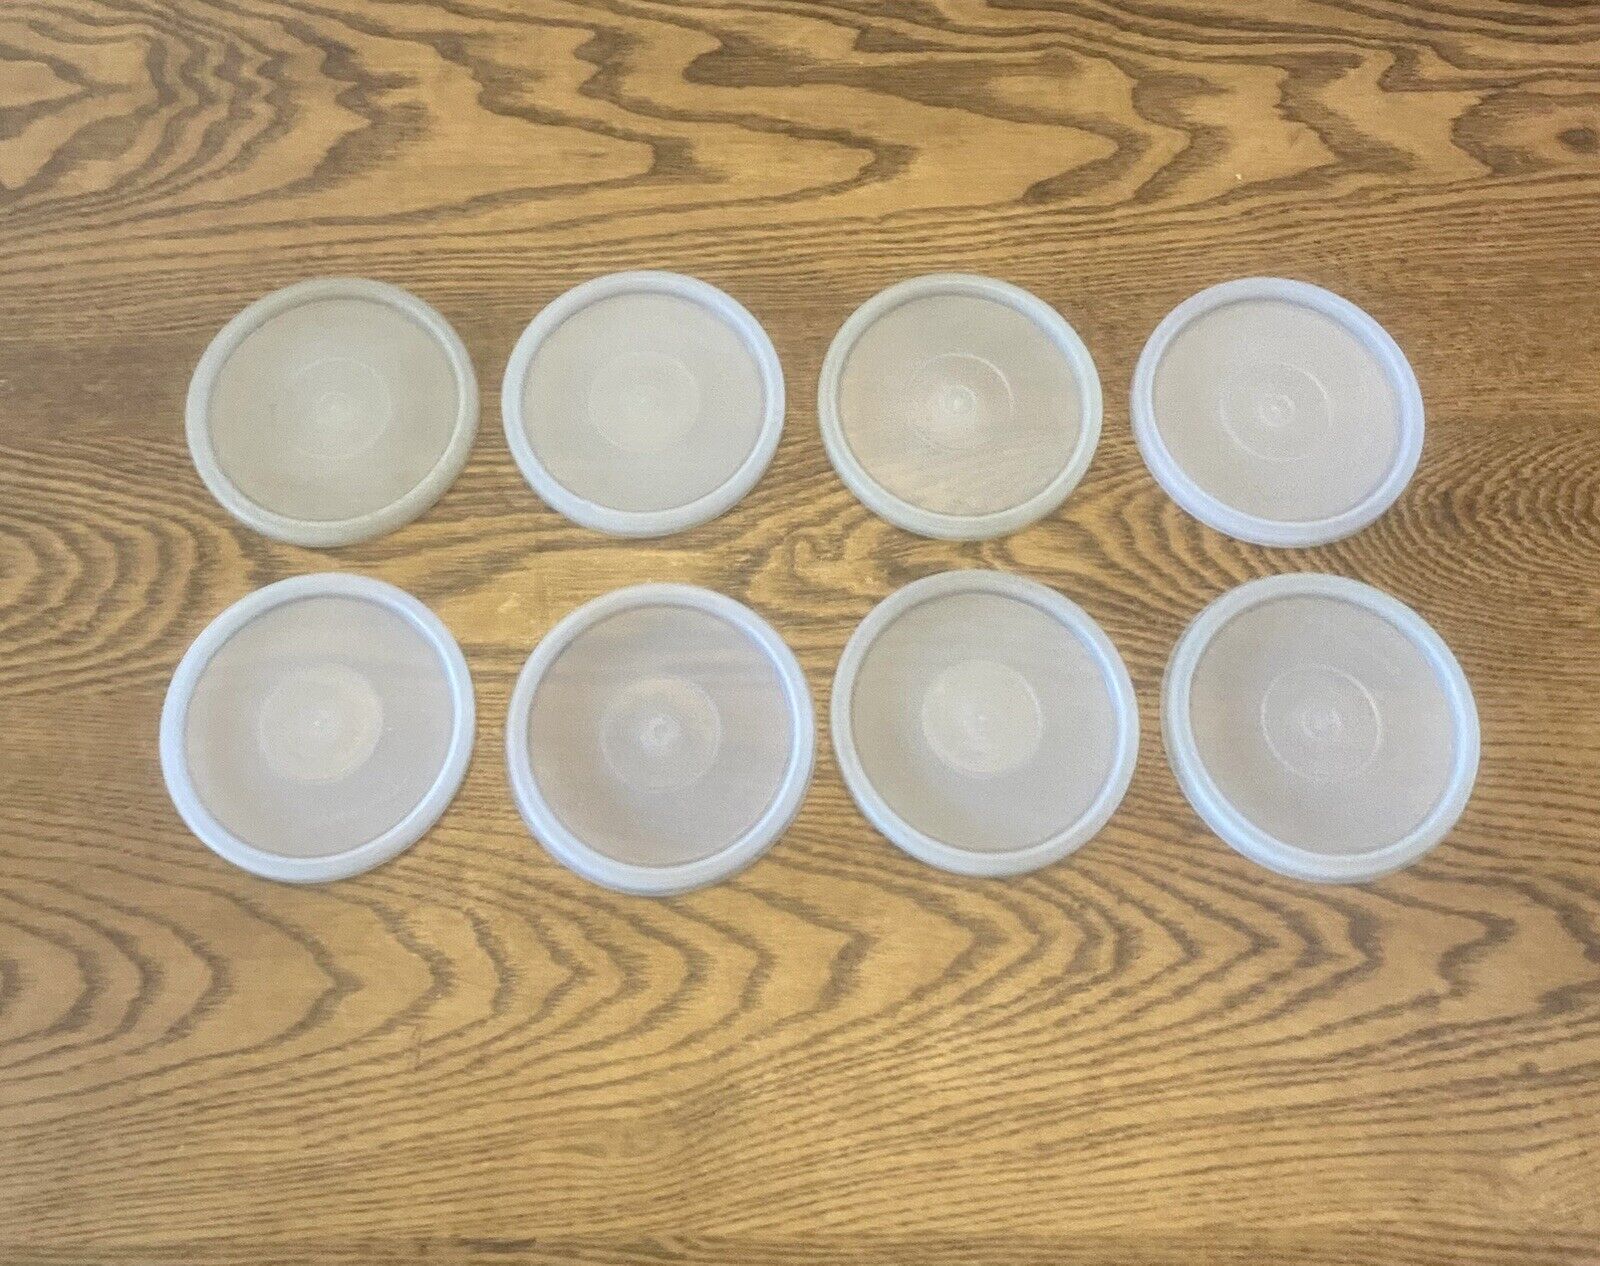 Lot of 8 - Vintage TUPPERWARE #1347 Replacement Seal Lids For 18oz Tumblers